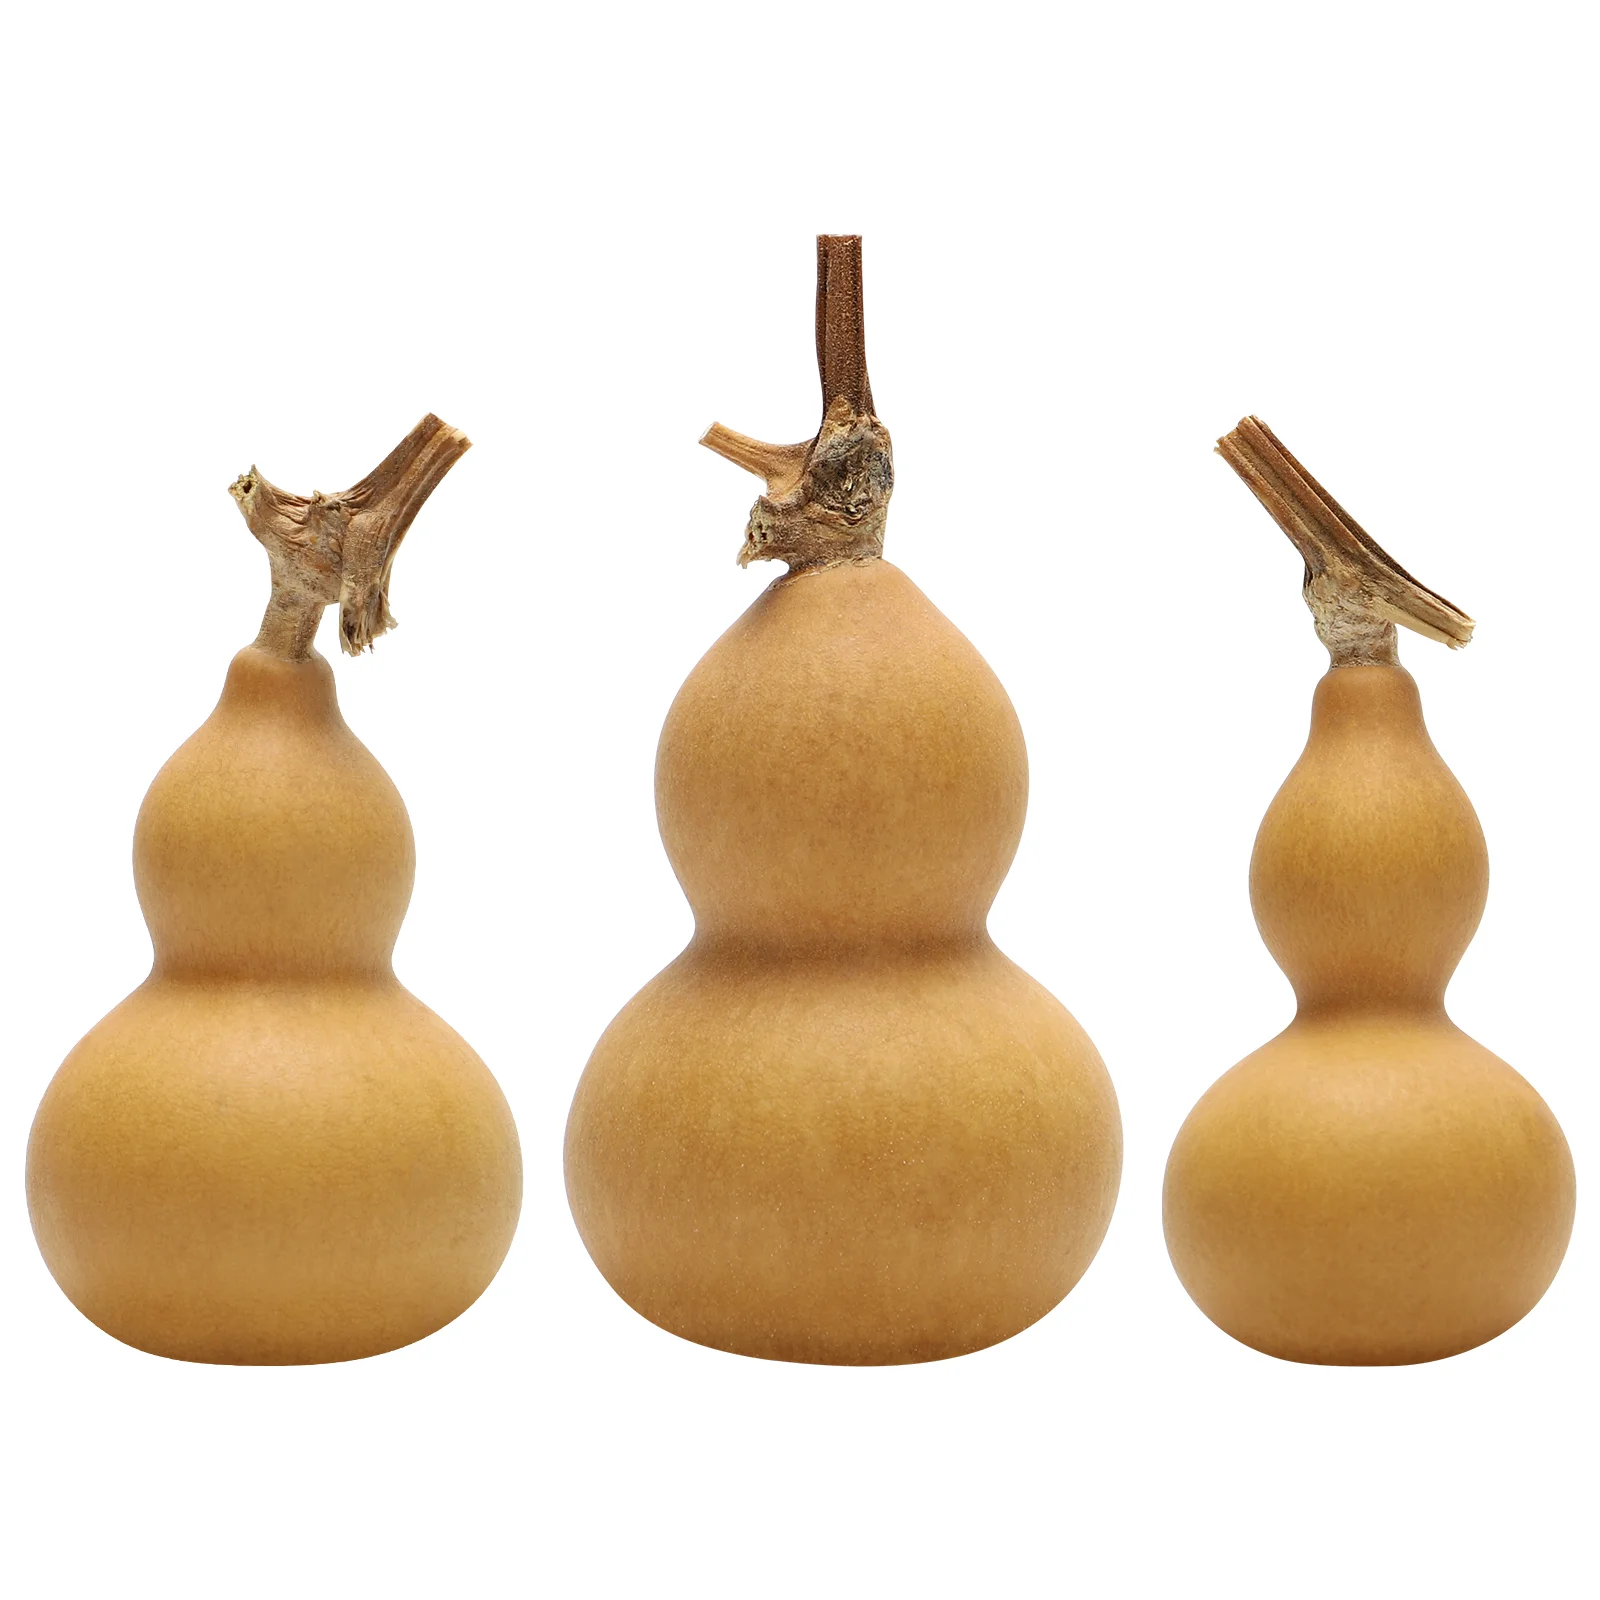 

Gourd Natural Gourds Decor Ornament Dried Chinese Desk Crafts Drinking Decorations Home Desktop Bottle Decoration Dry Ornaments